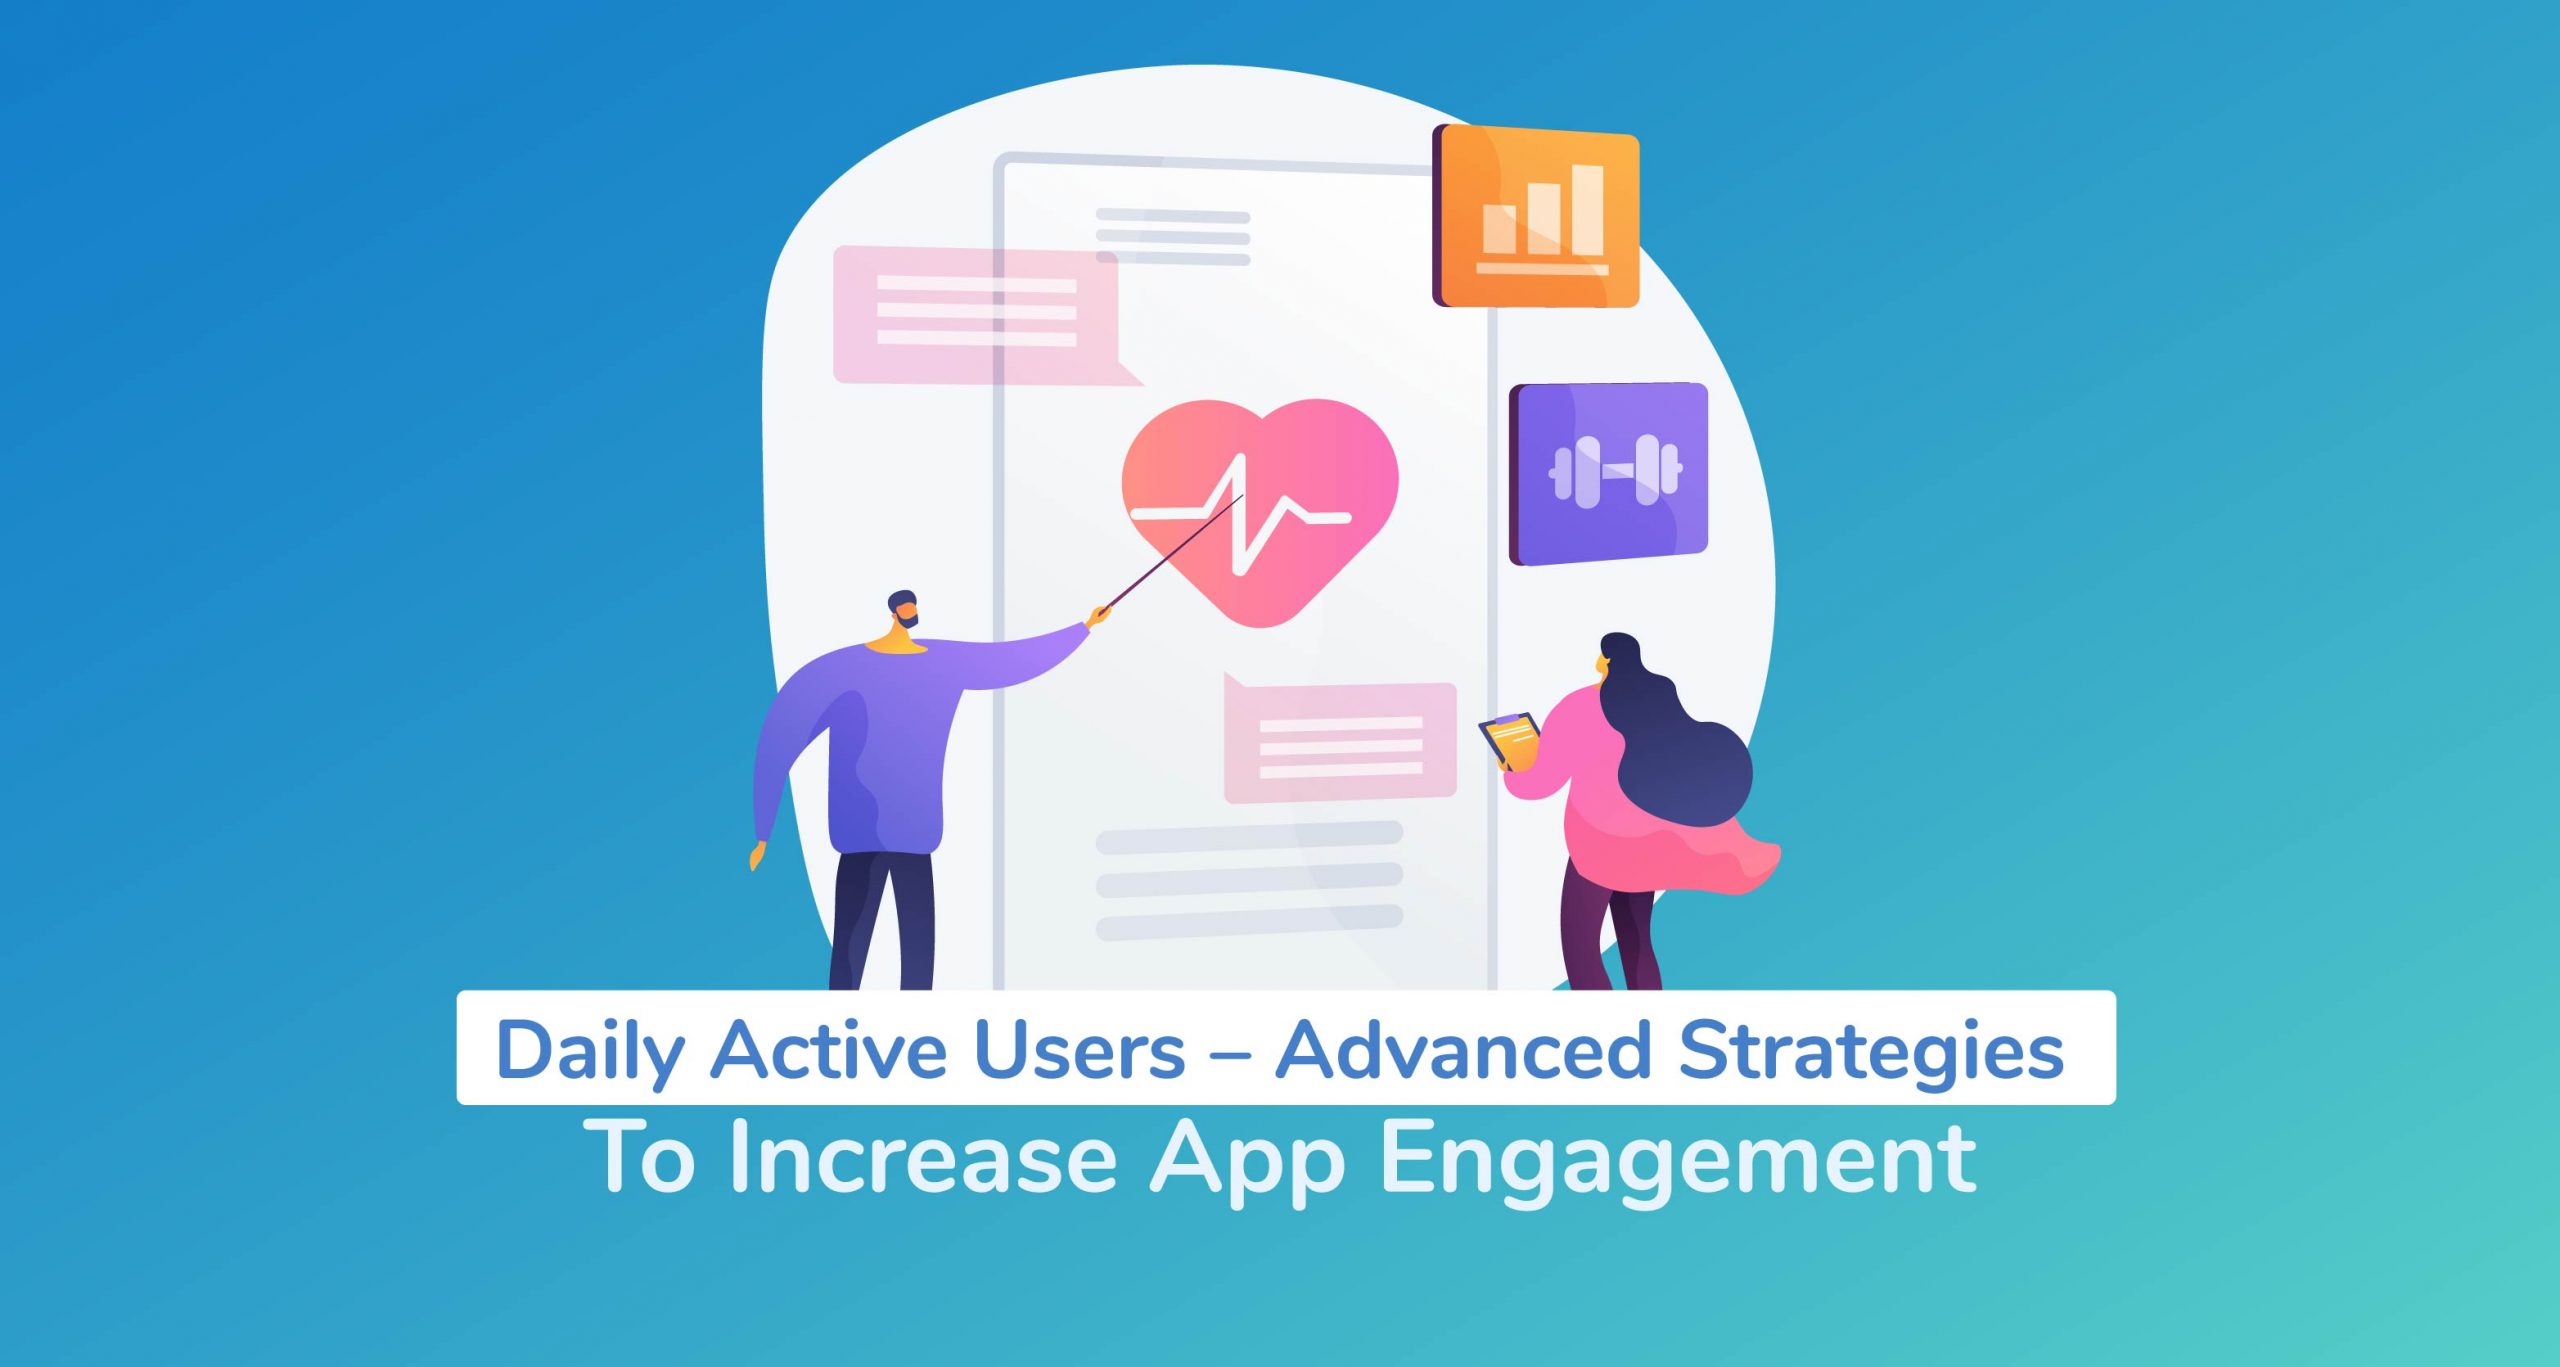 Daily Active Users – Advanced Strategies To Increase App Engagement